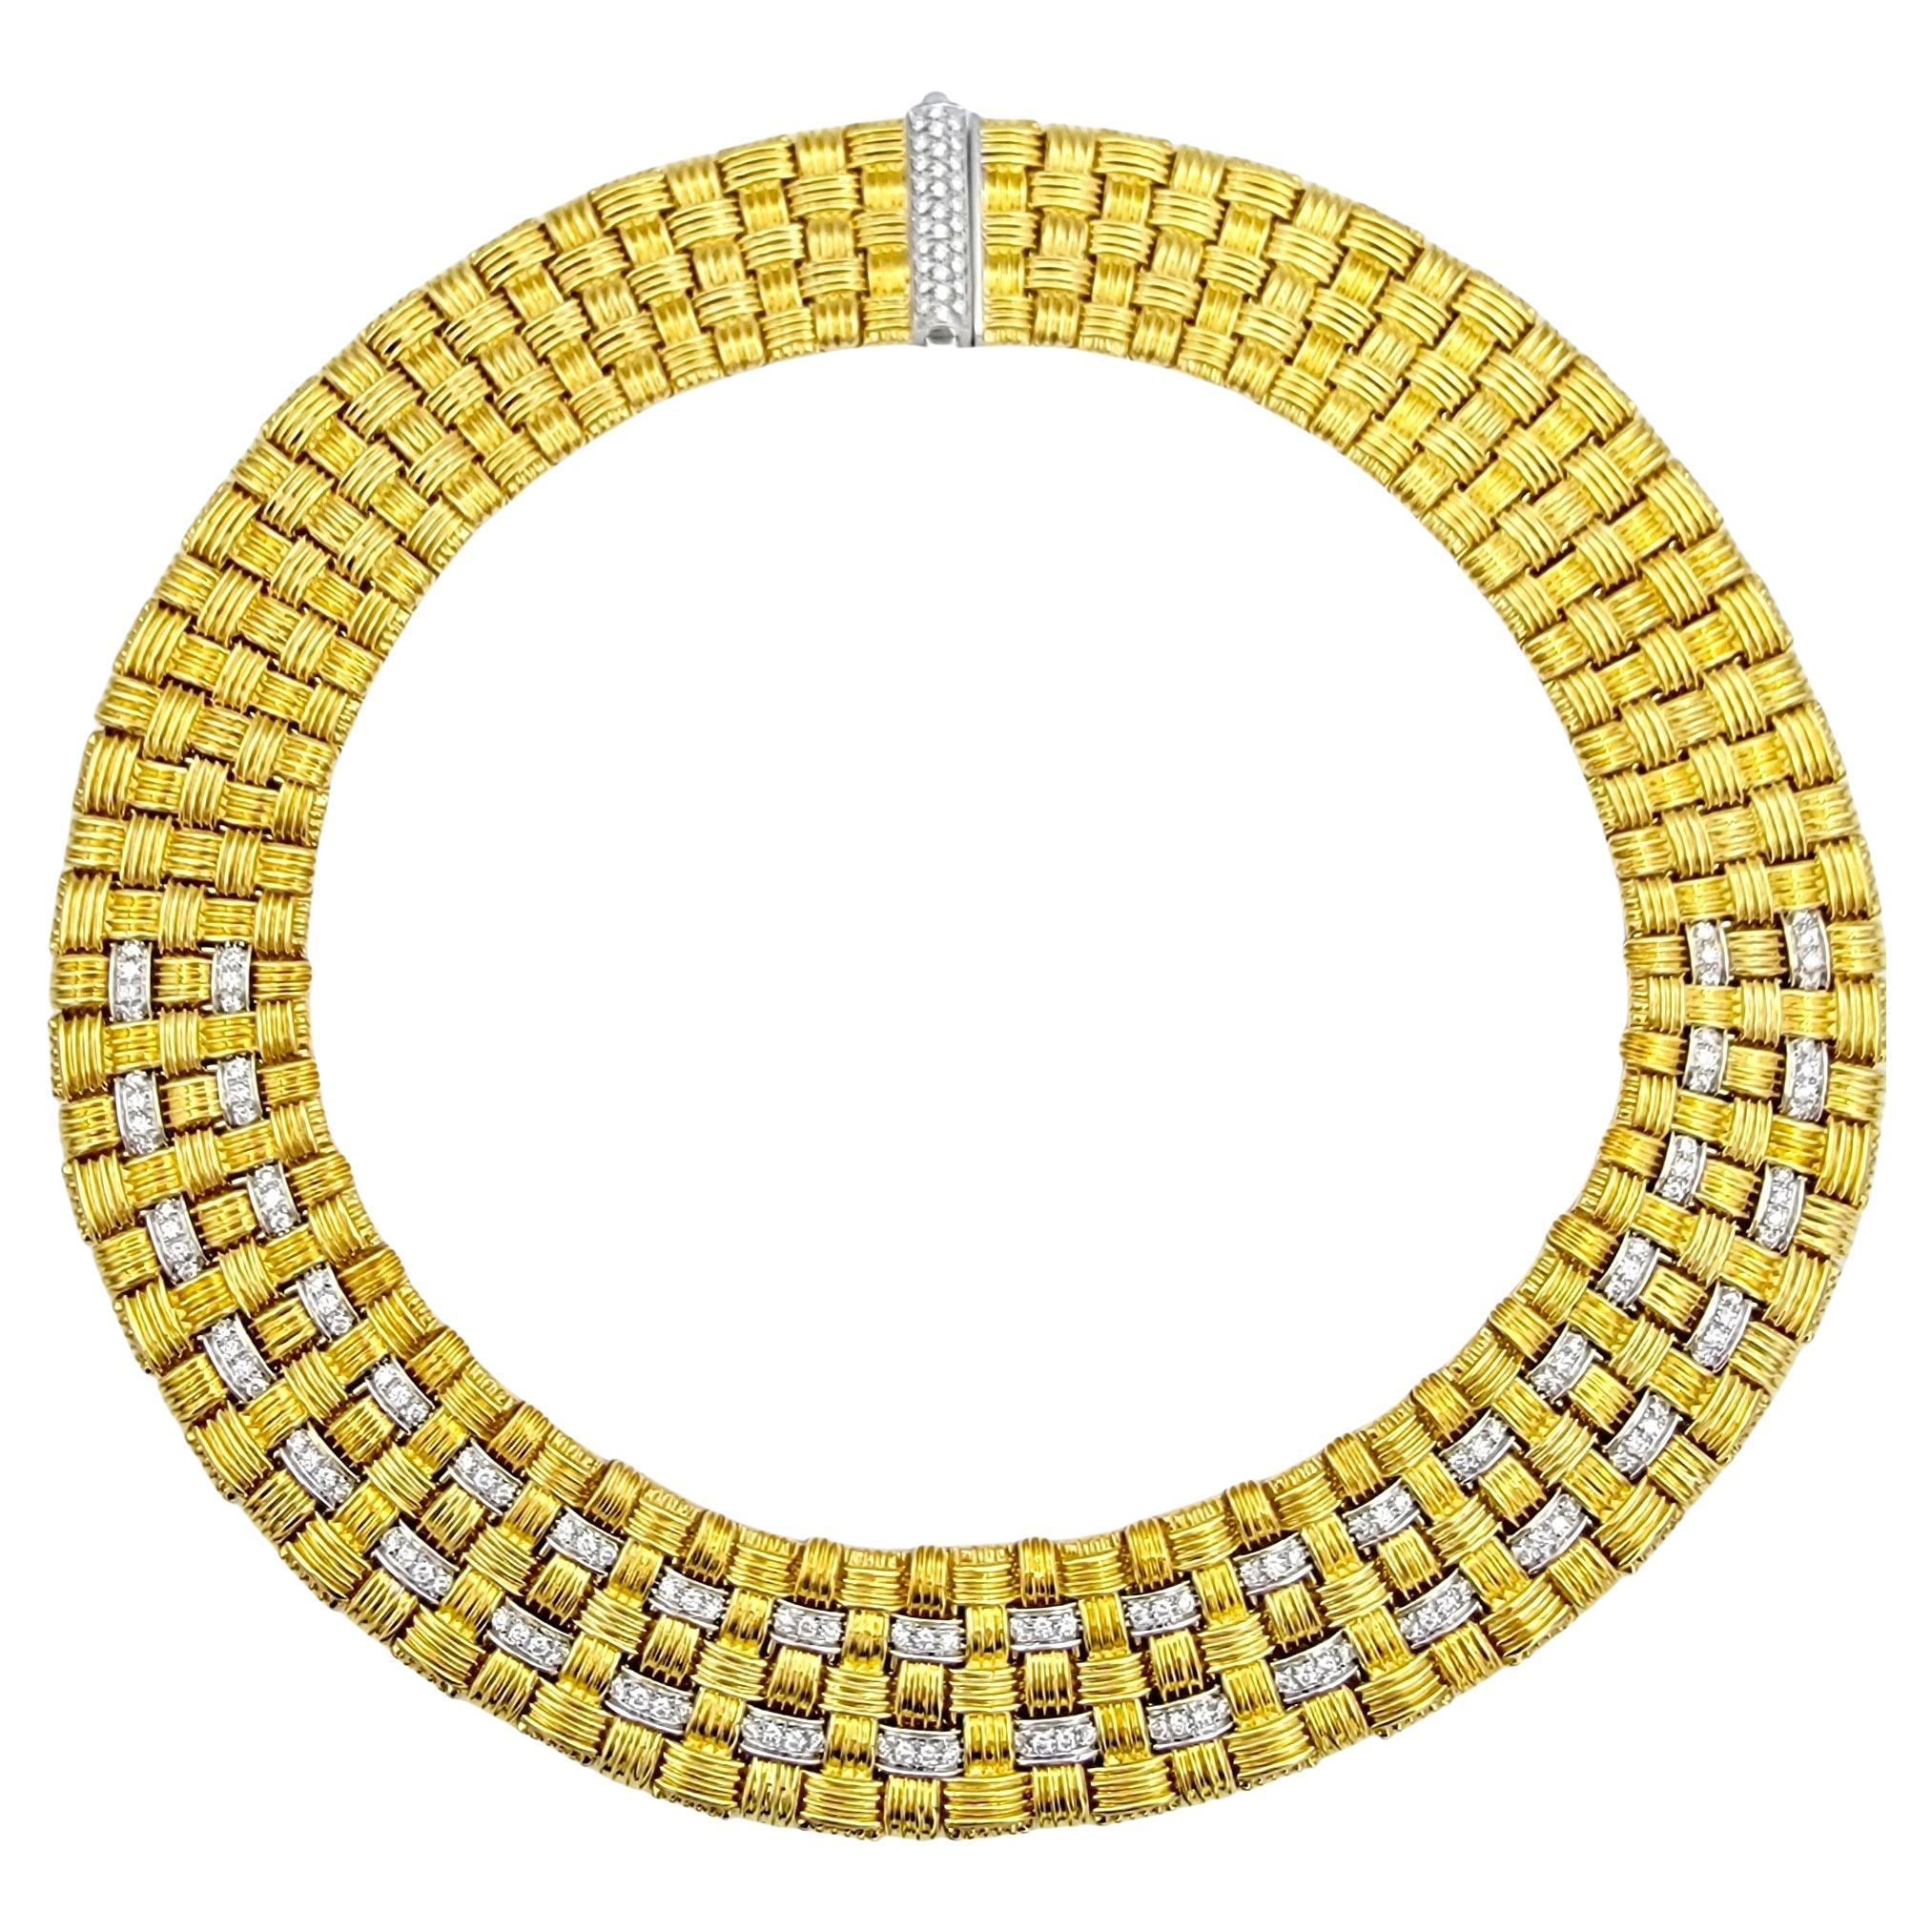 This beautiful Roberto Coin Appassionata diamond collar necklace, crafted in 18 karat yellow gold, is a luxurious and sophisticated piece of jewelry that exudes elegance and style. This exquisite collar necklace features the iconic Appassionata